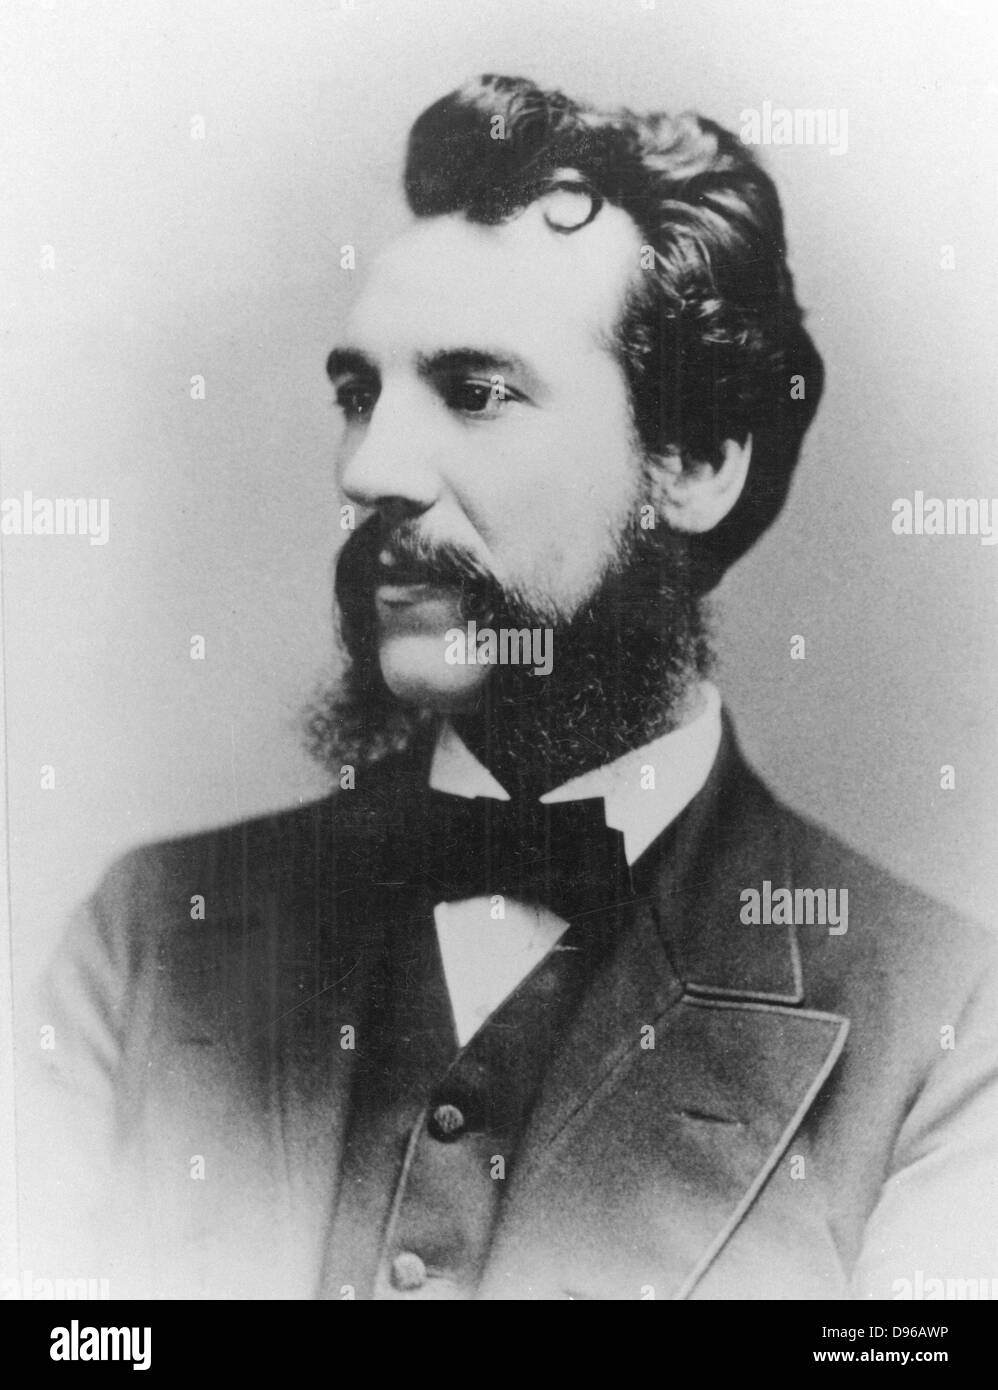 Alexander Graham Bell (1847-1922) Scottish-born American inventor; patented telephone 1876. Photograph of Bell as a young man. Stock Photo